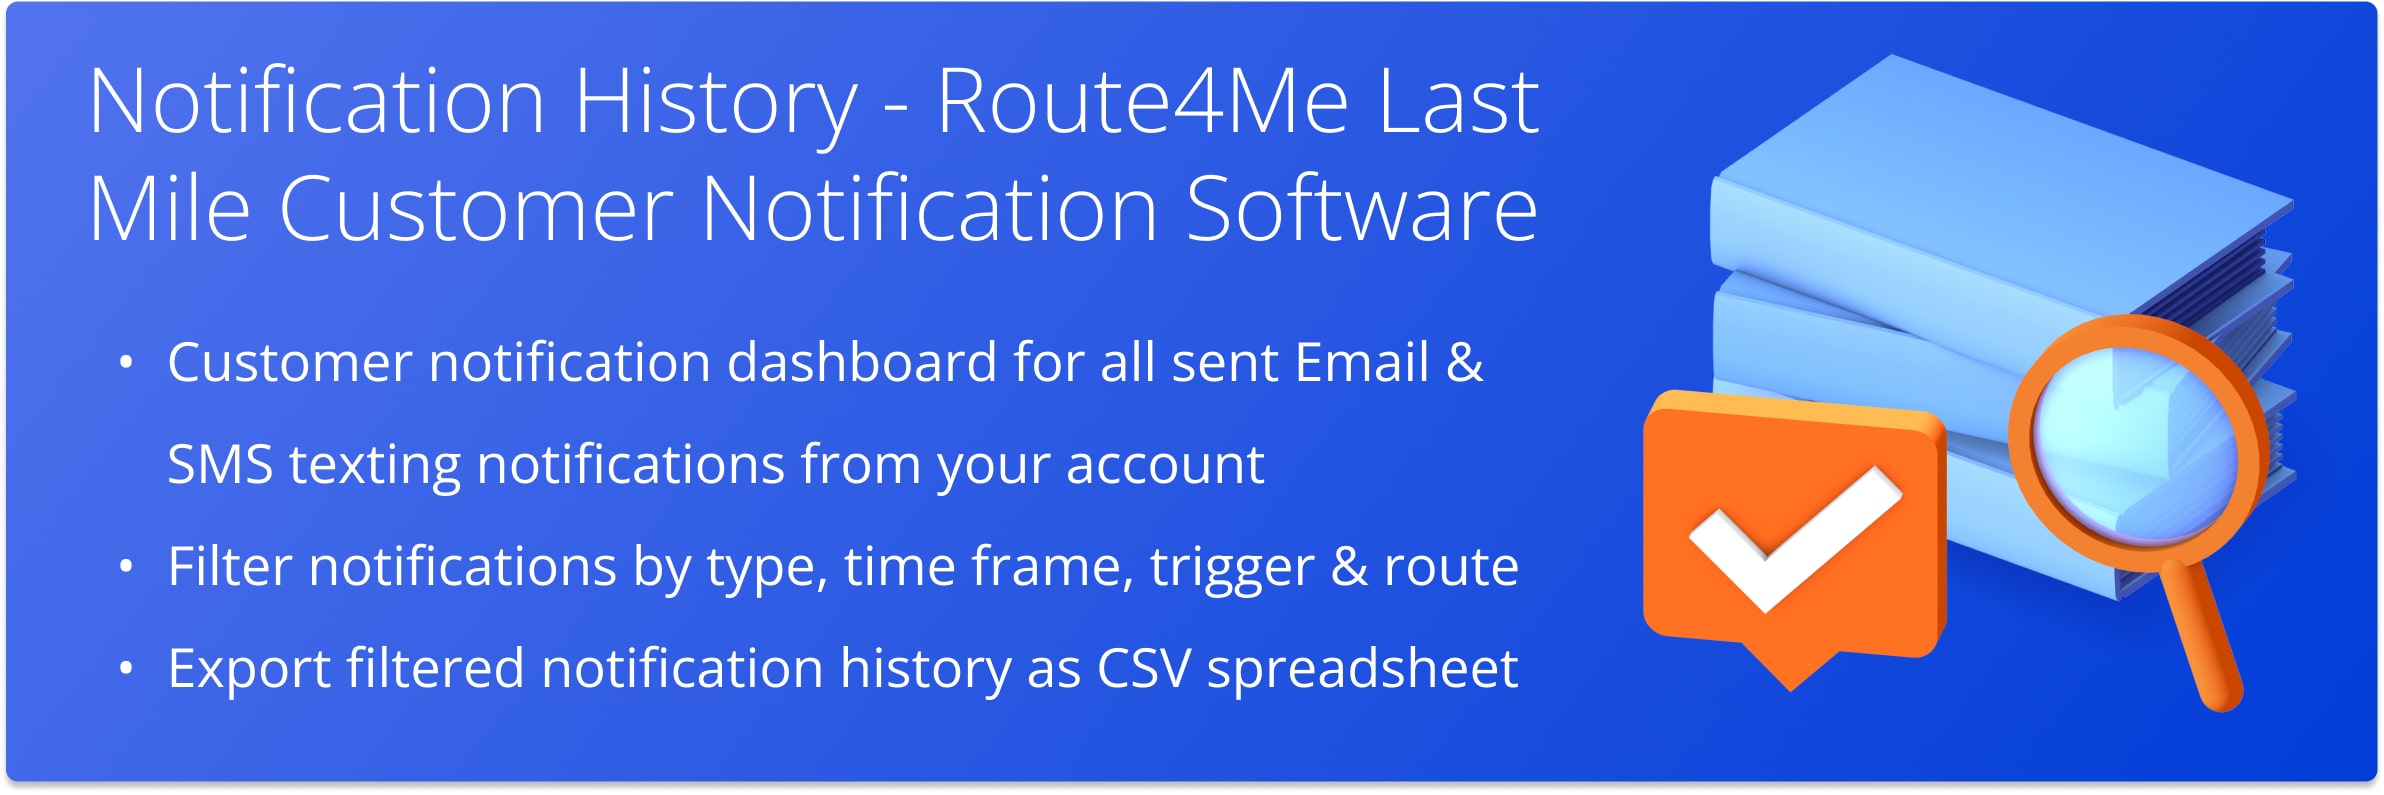 Open notification history dashboard to view all sent customer SMS and Email notifications from your account. Filter notification history and export filtered notifications as CSV spreadsheet.